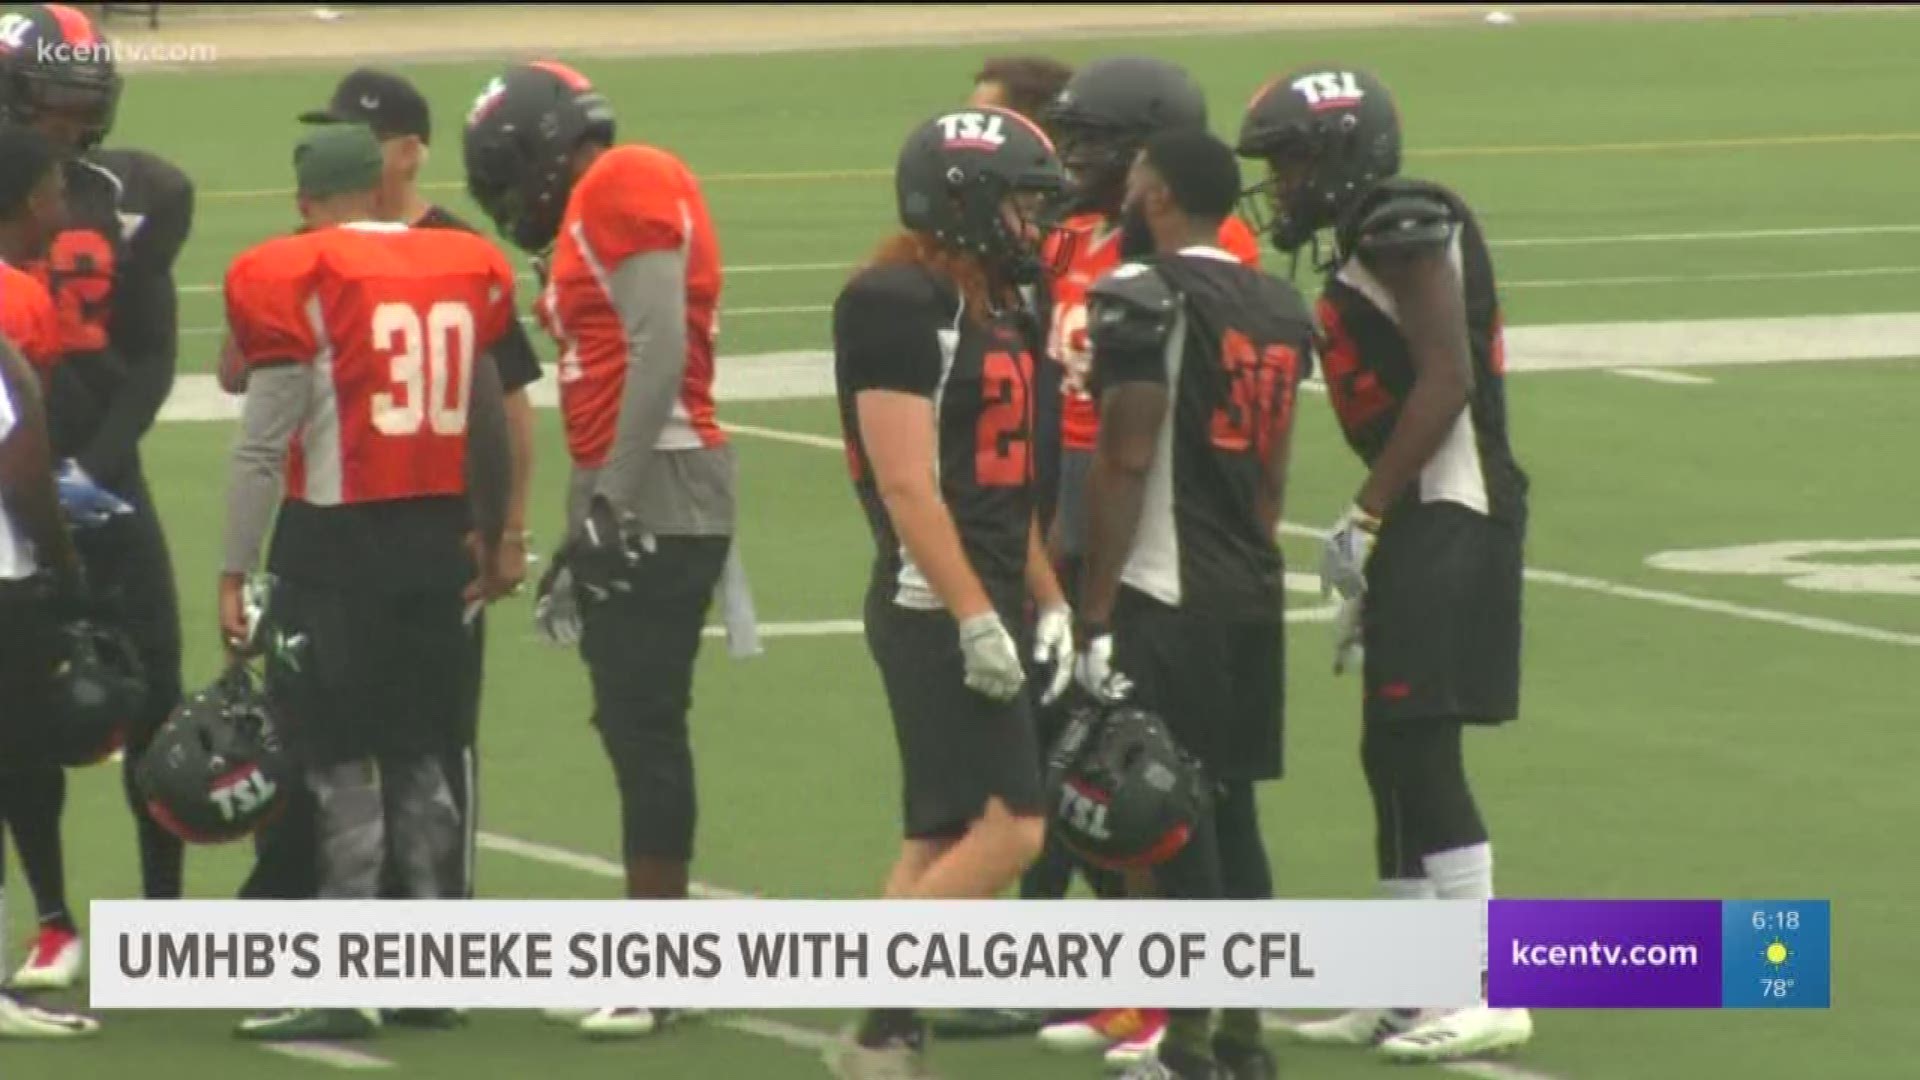 UMHB's Keith Reineke also has signed with Calgary. 